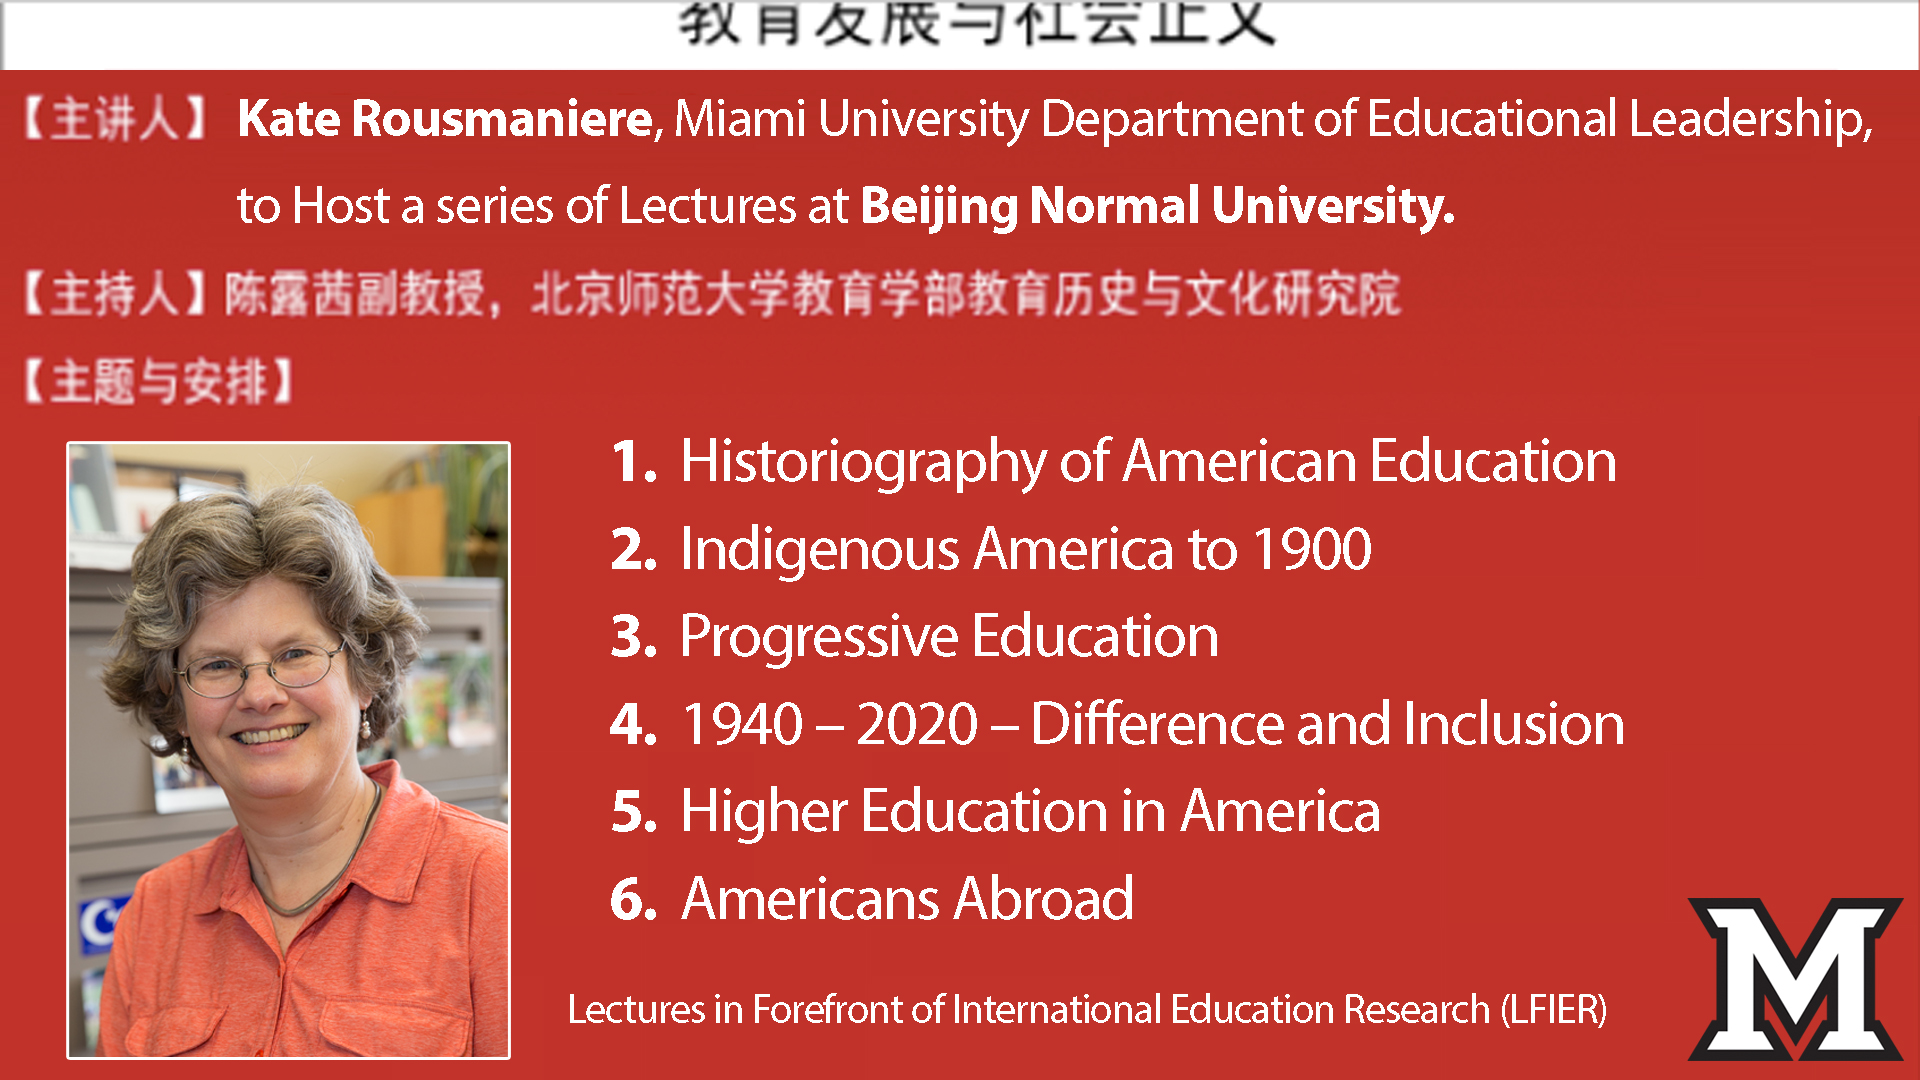 Kate Rousmaniere to host a series of lectures at Beijing Normal University